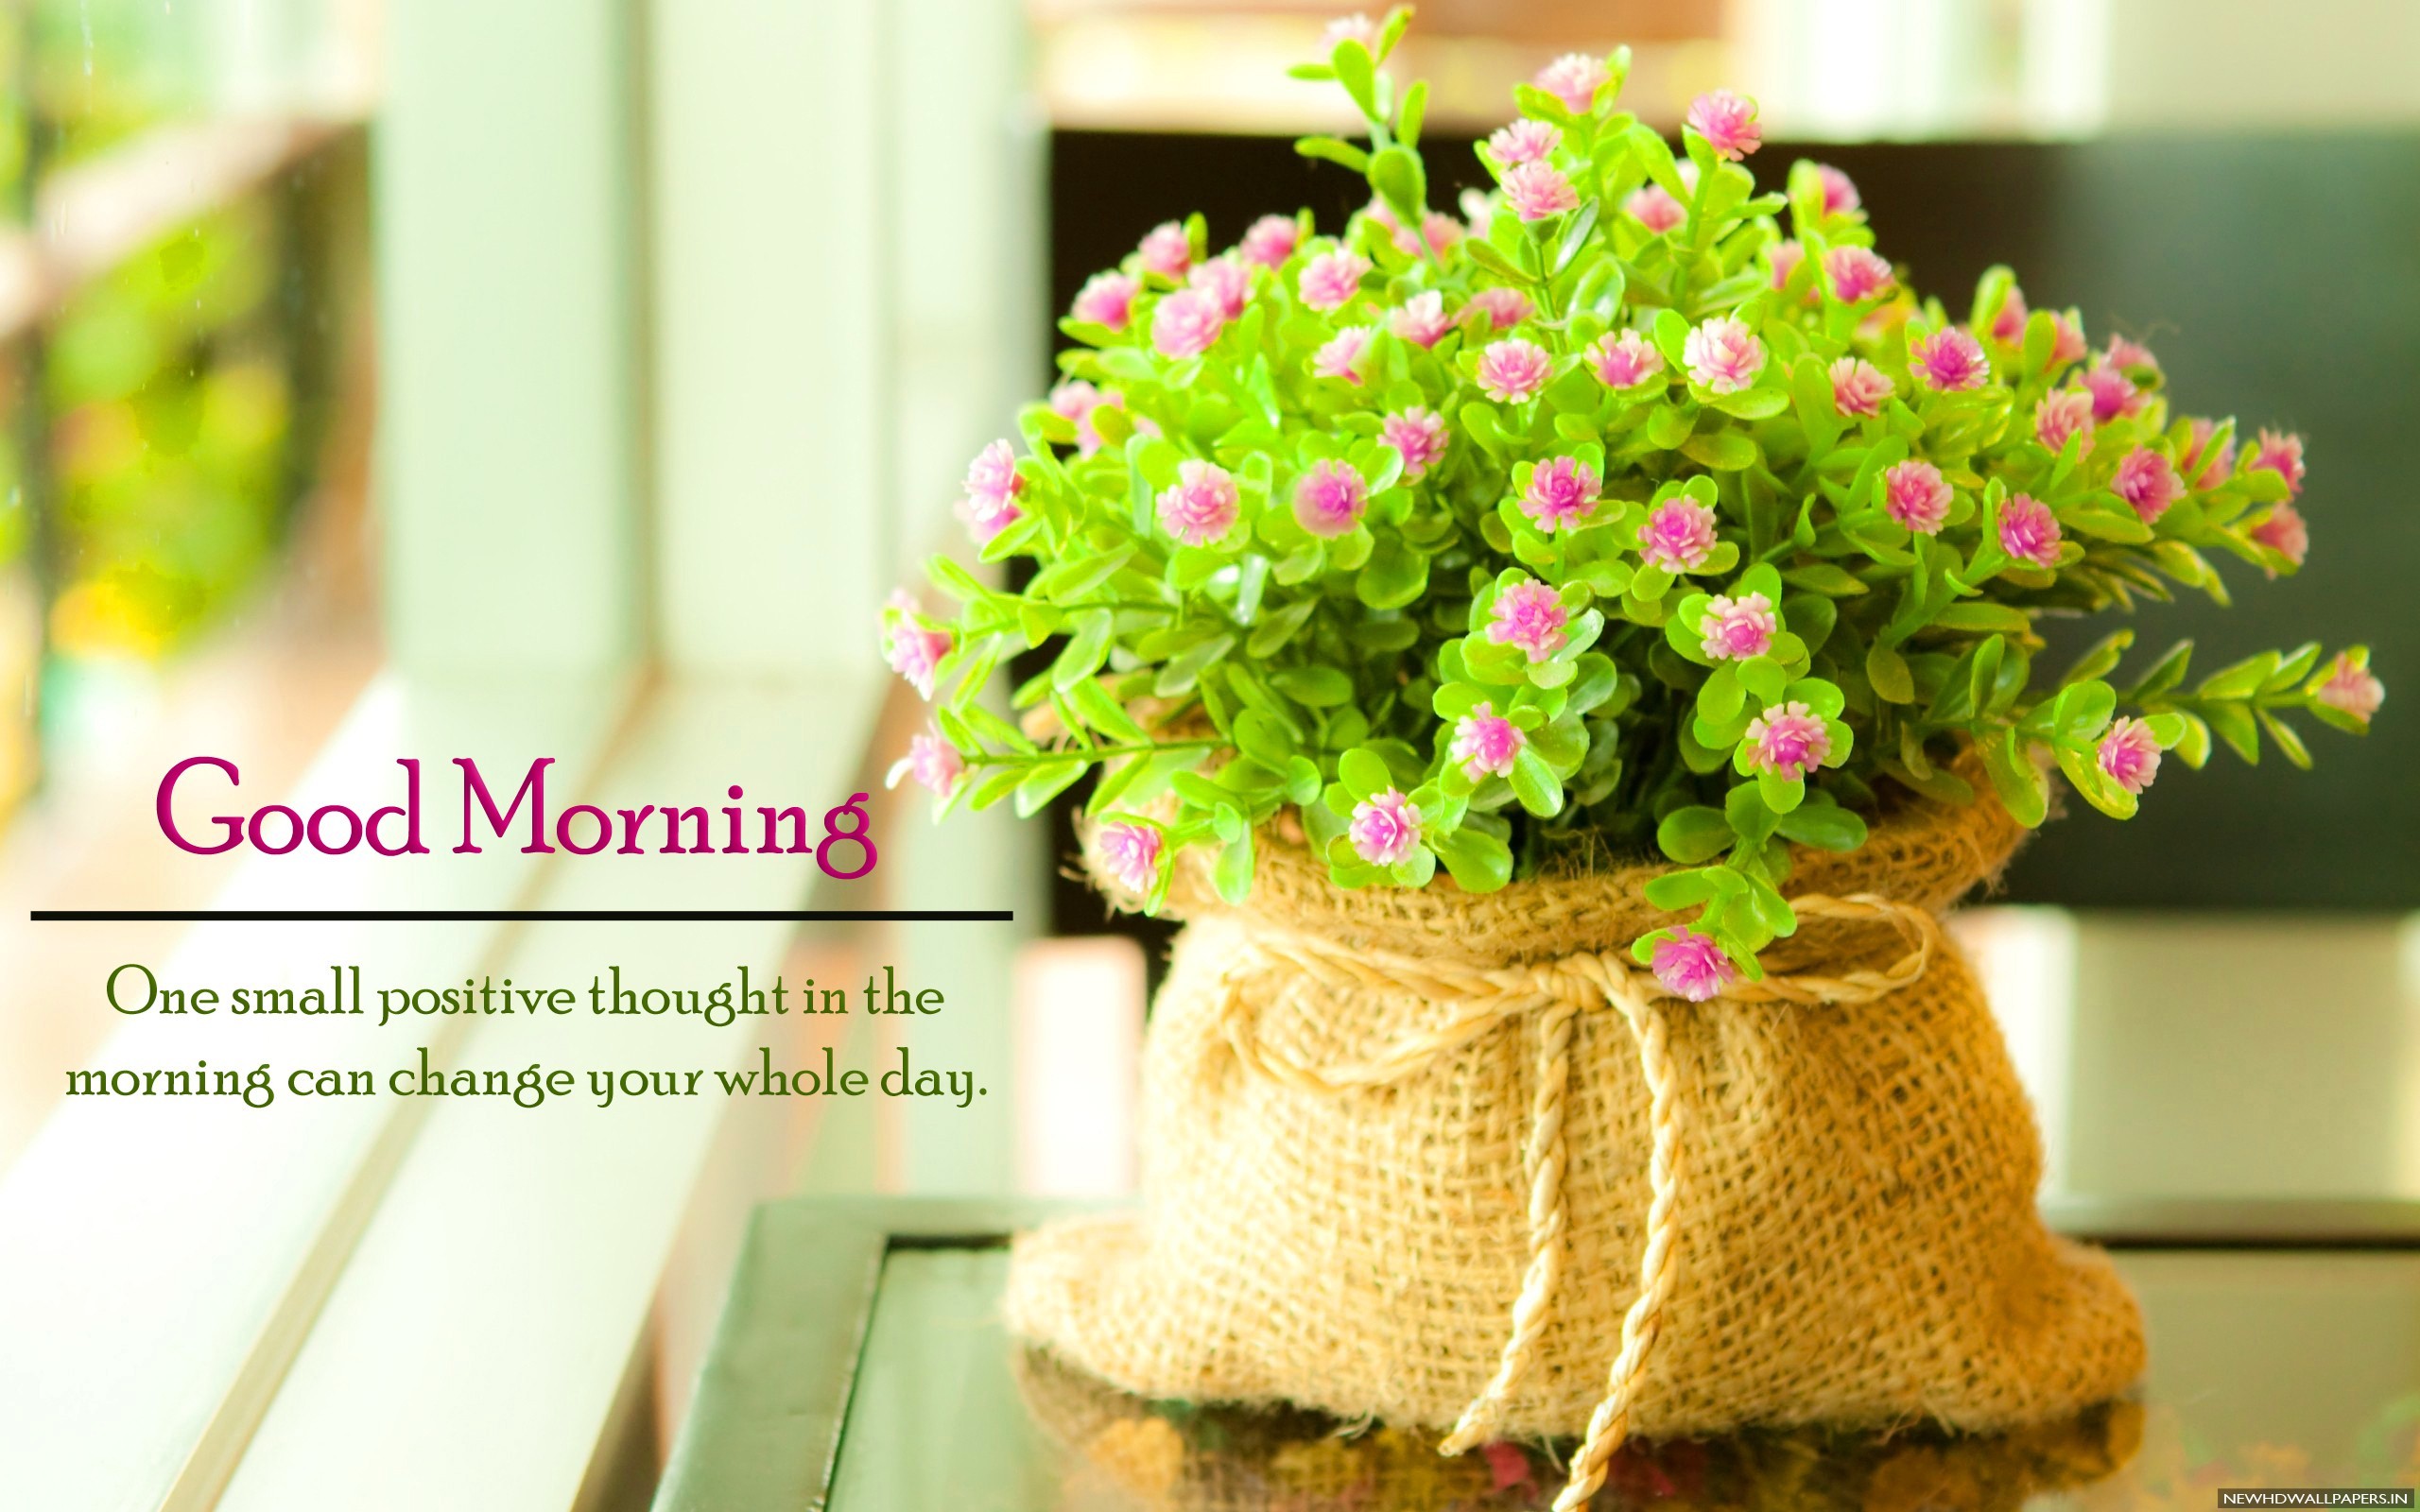 Best Good Morning Quote Flowers Hd Wallpaper New Hd - Good Morning Best Image Hd - HD Wallpaper 